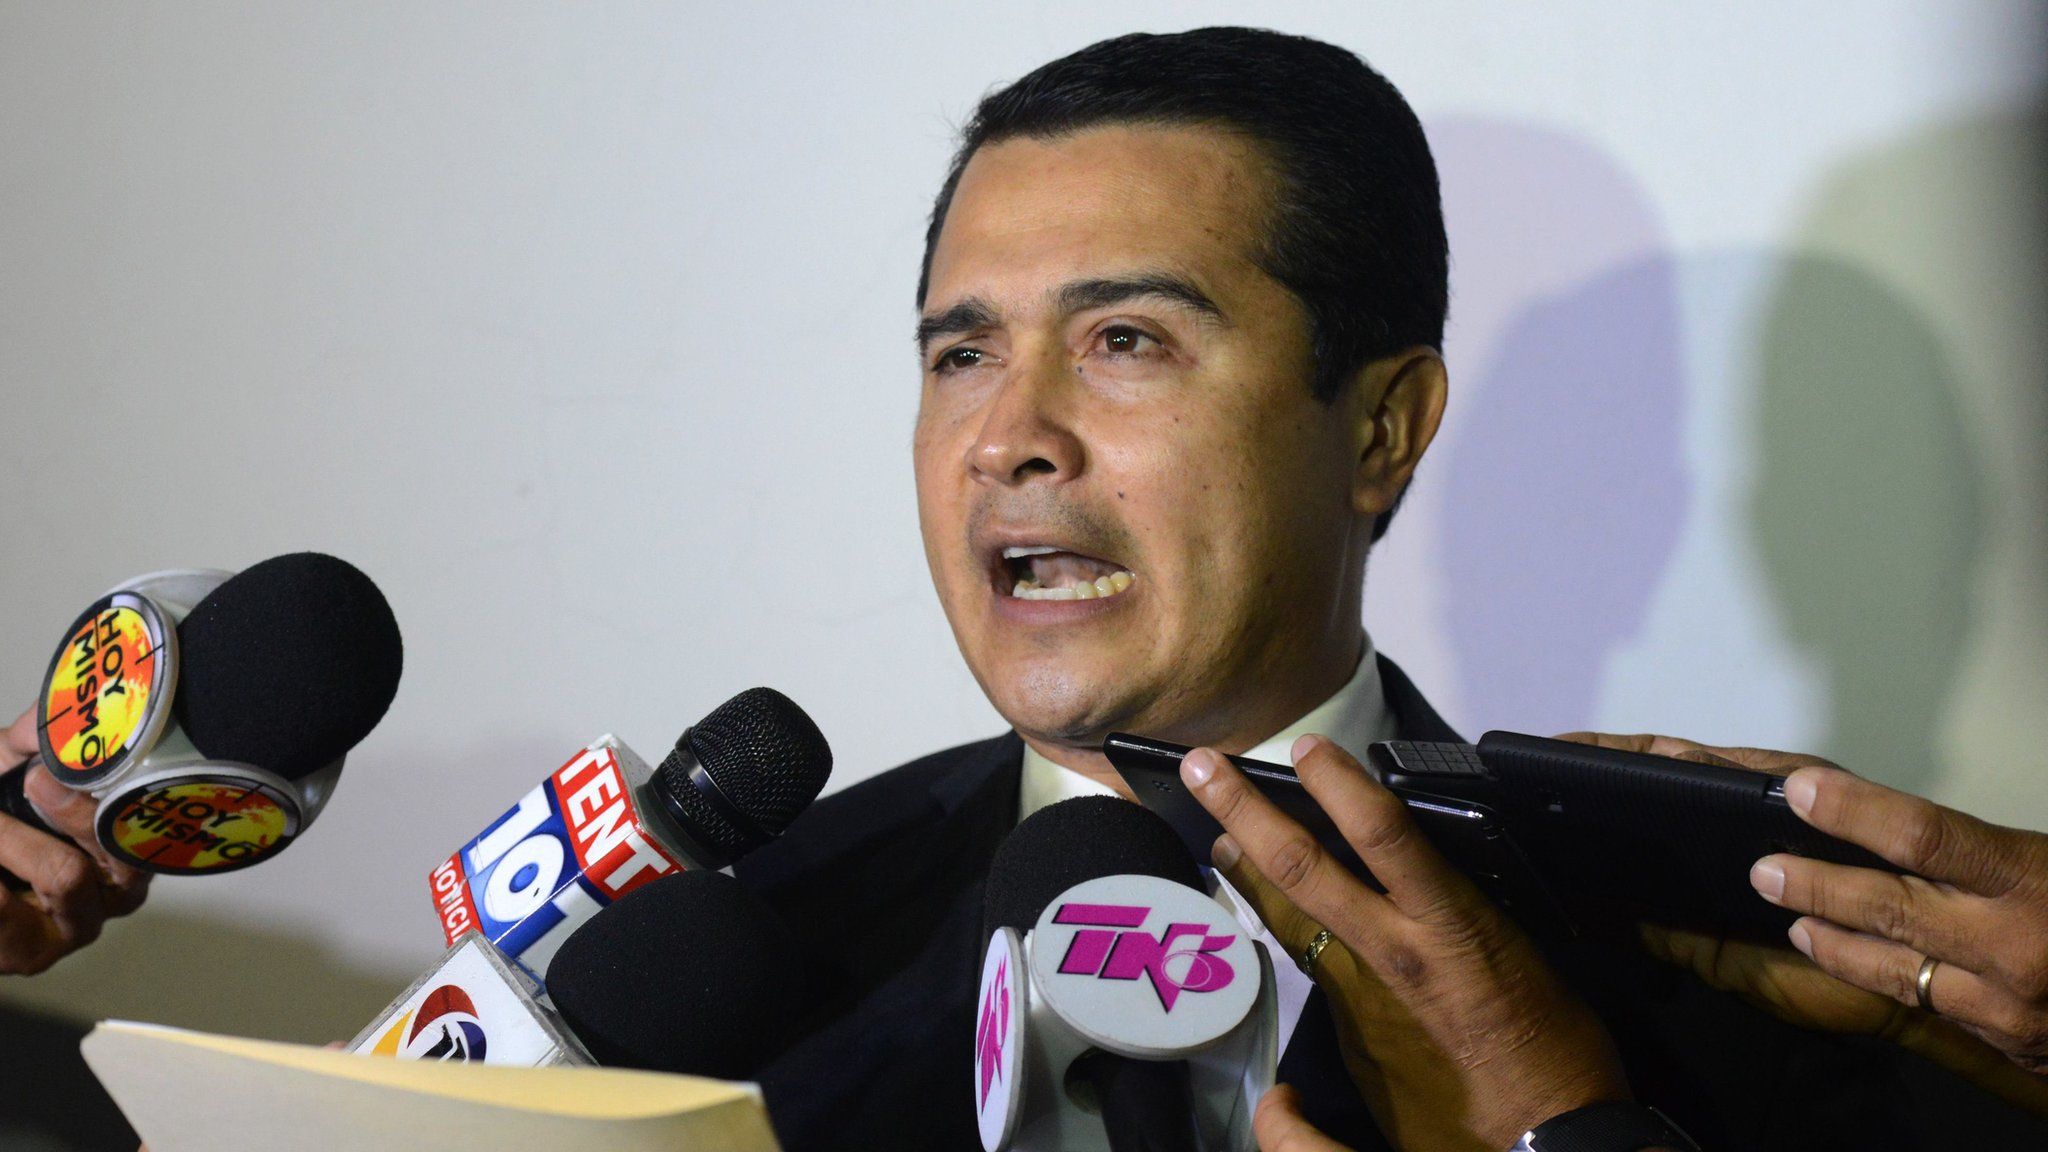 Juan Antonio Hernandez speaks with the press upon arrival at the Toncontin international airport from the United States, on October 25, 2016 in Tegucigalpa